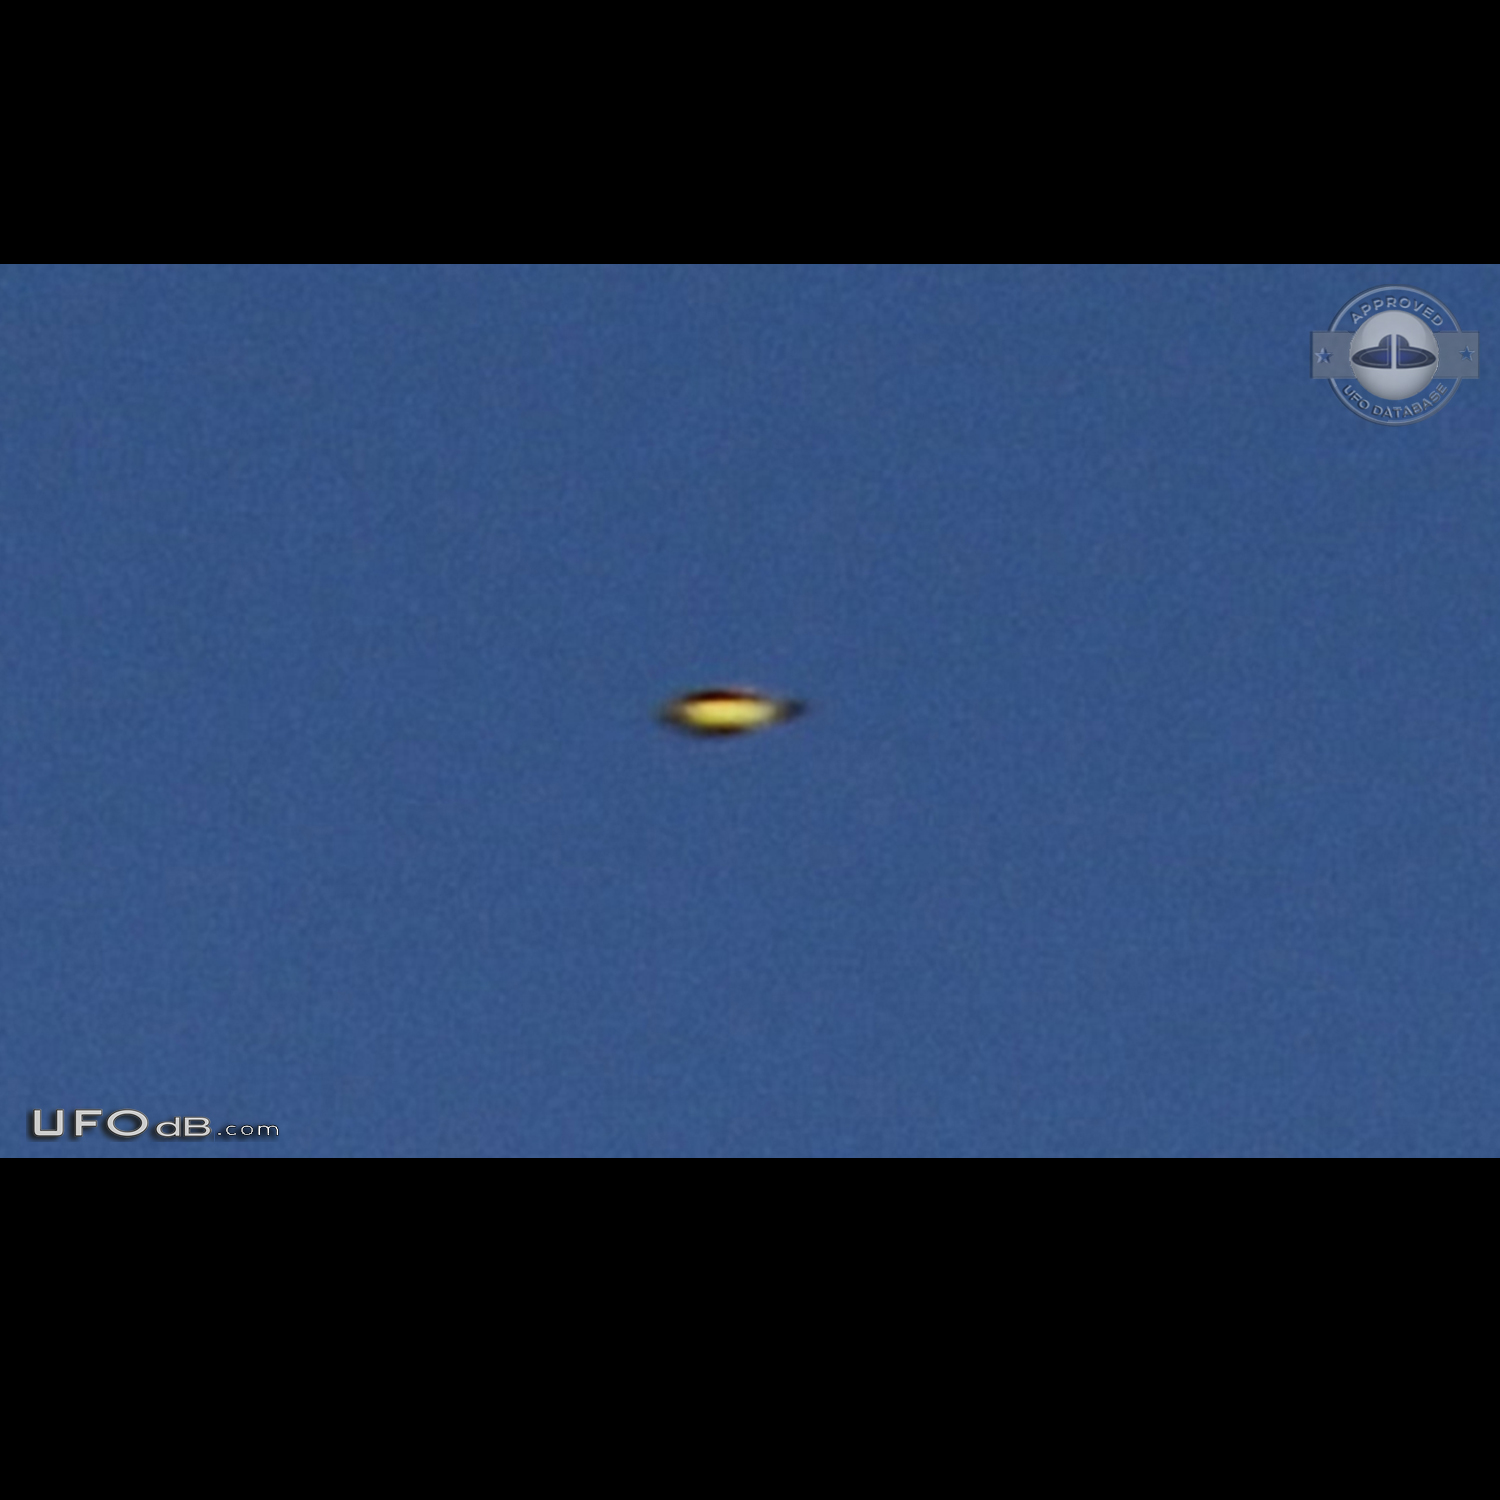 UFO Expert Captures Close Encounter With Disk-Shaped UFO 2015 UFO Picture #684-1